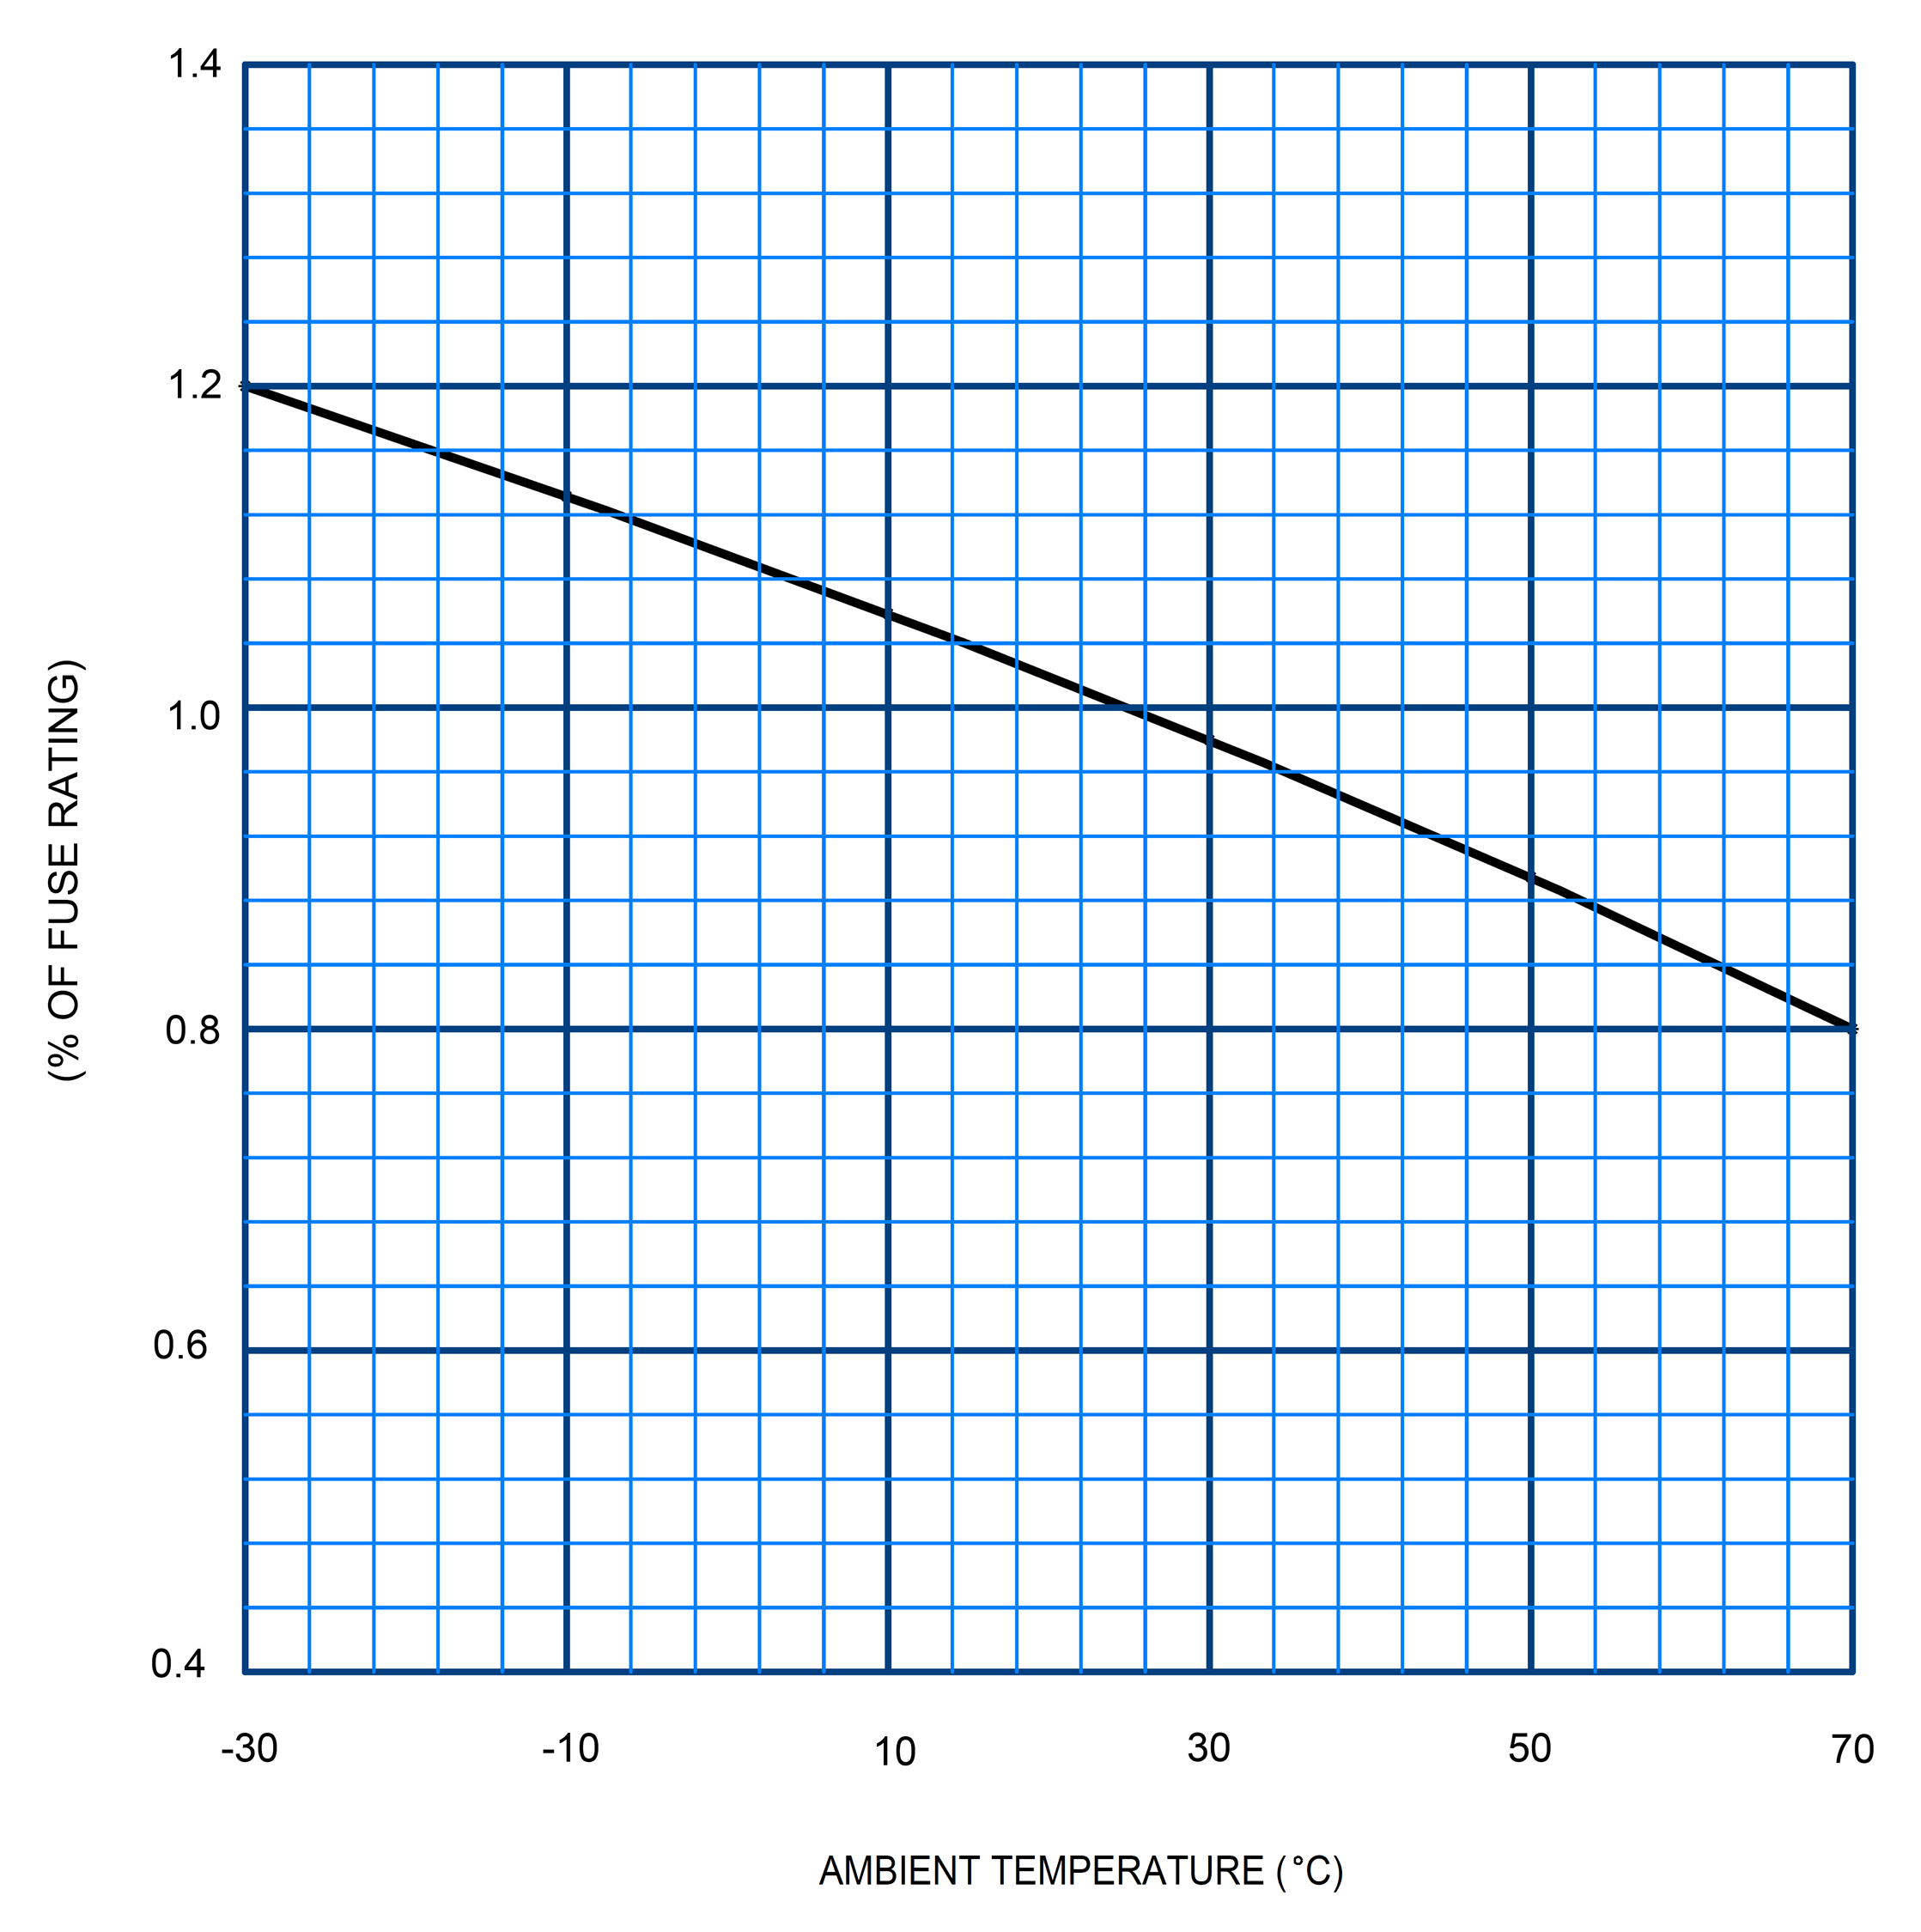  Example (line graph) of a fuse derating chart for abnormal ambient temperatures.